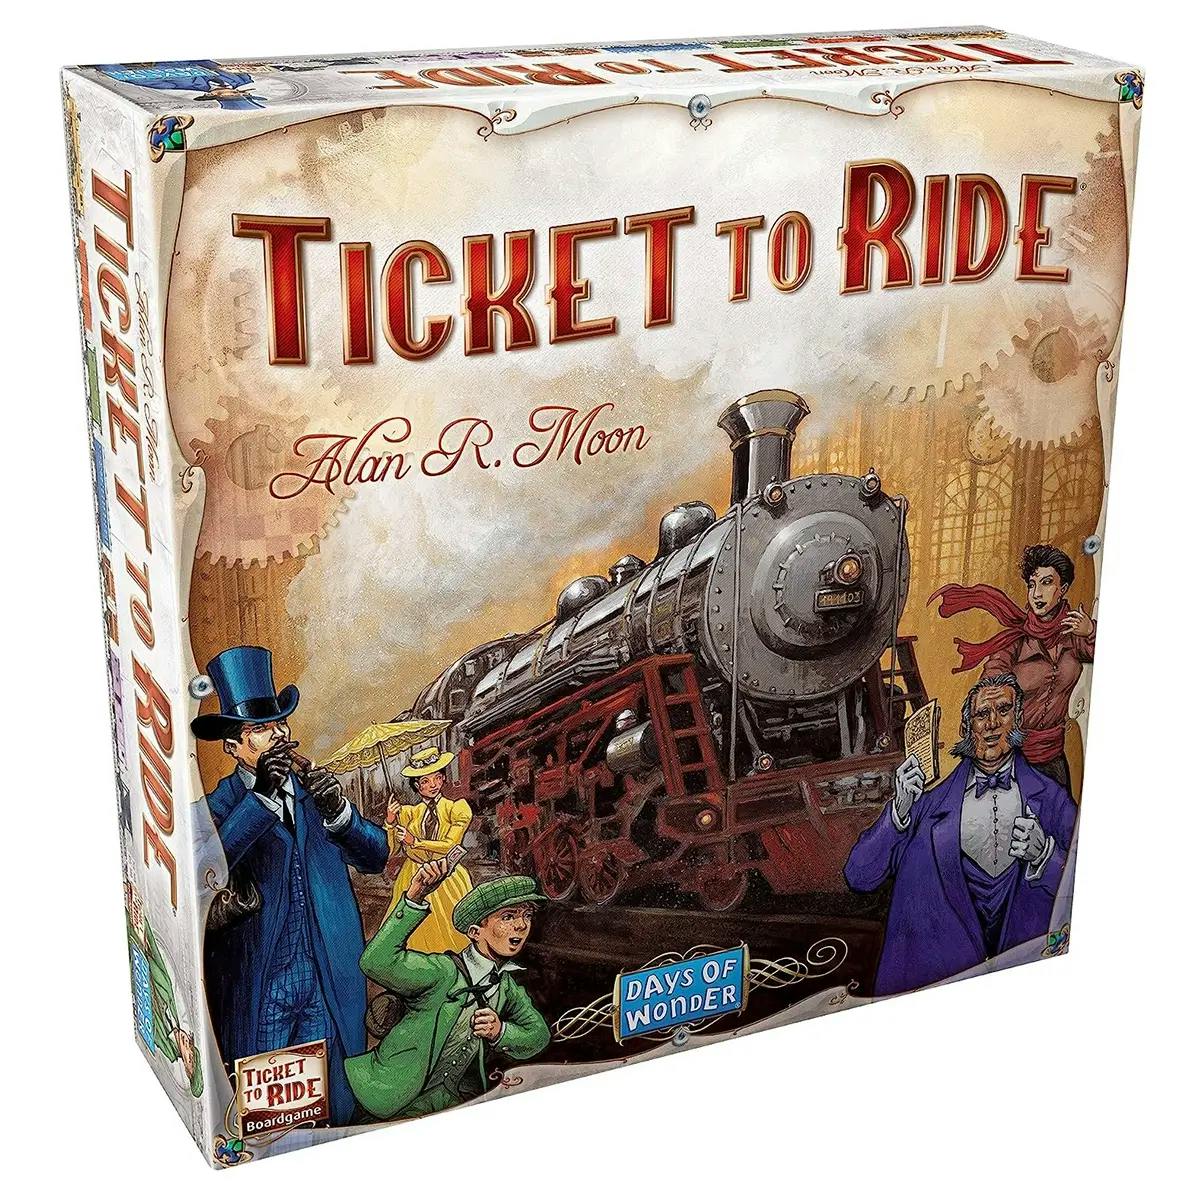 Ticket to Ride board game.